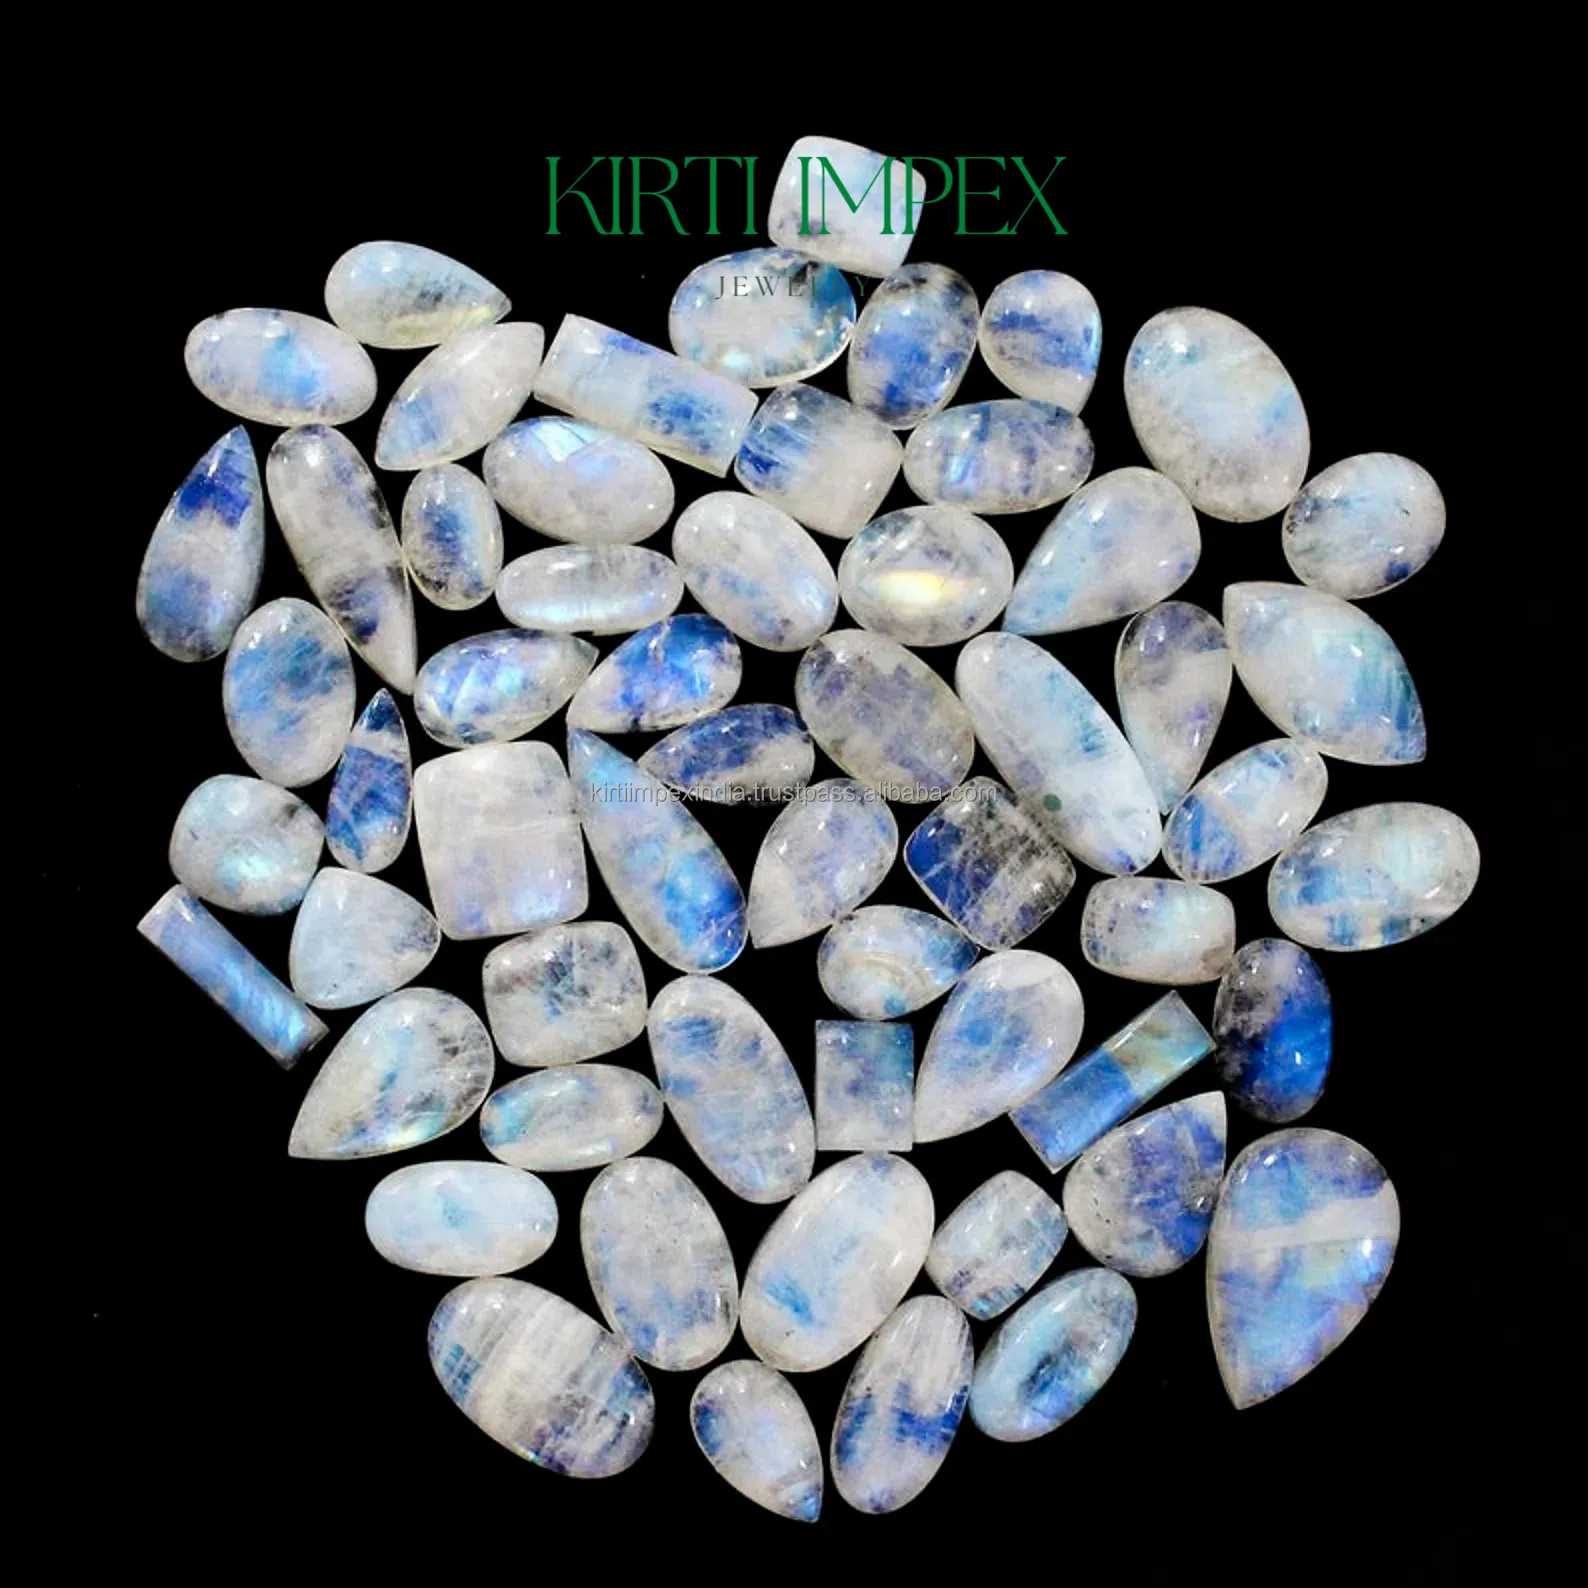 Natural Blue Fire Rainbow Moonstone Stone Bulk Cabochons For Jewelry Making Hand-polished Wholesale Semi-Precious Gemstone Cabs